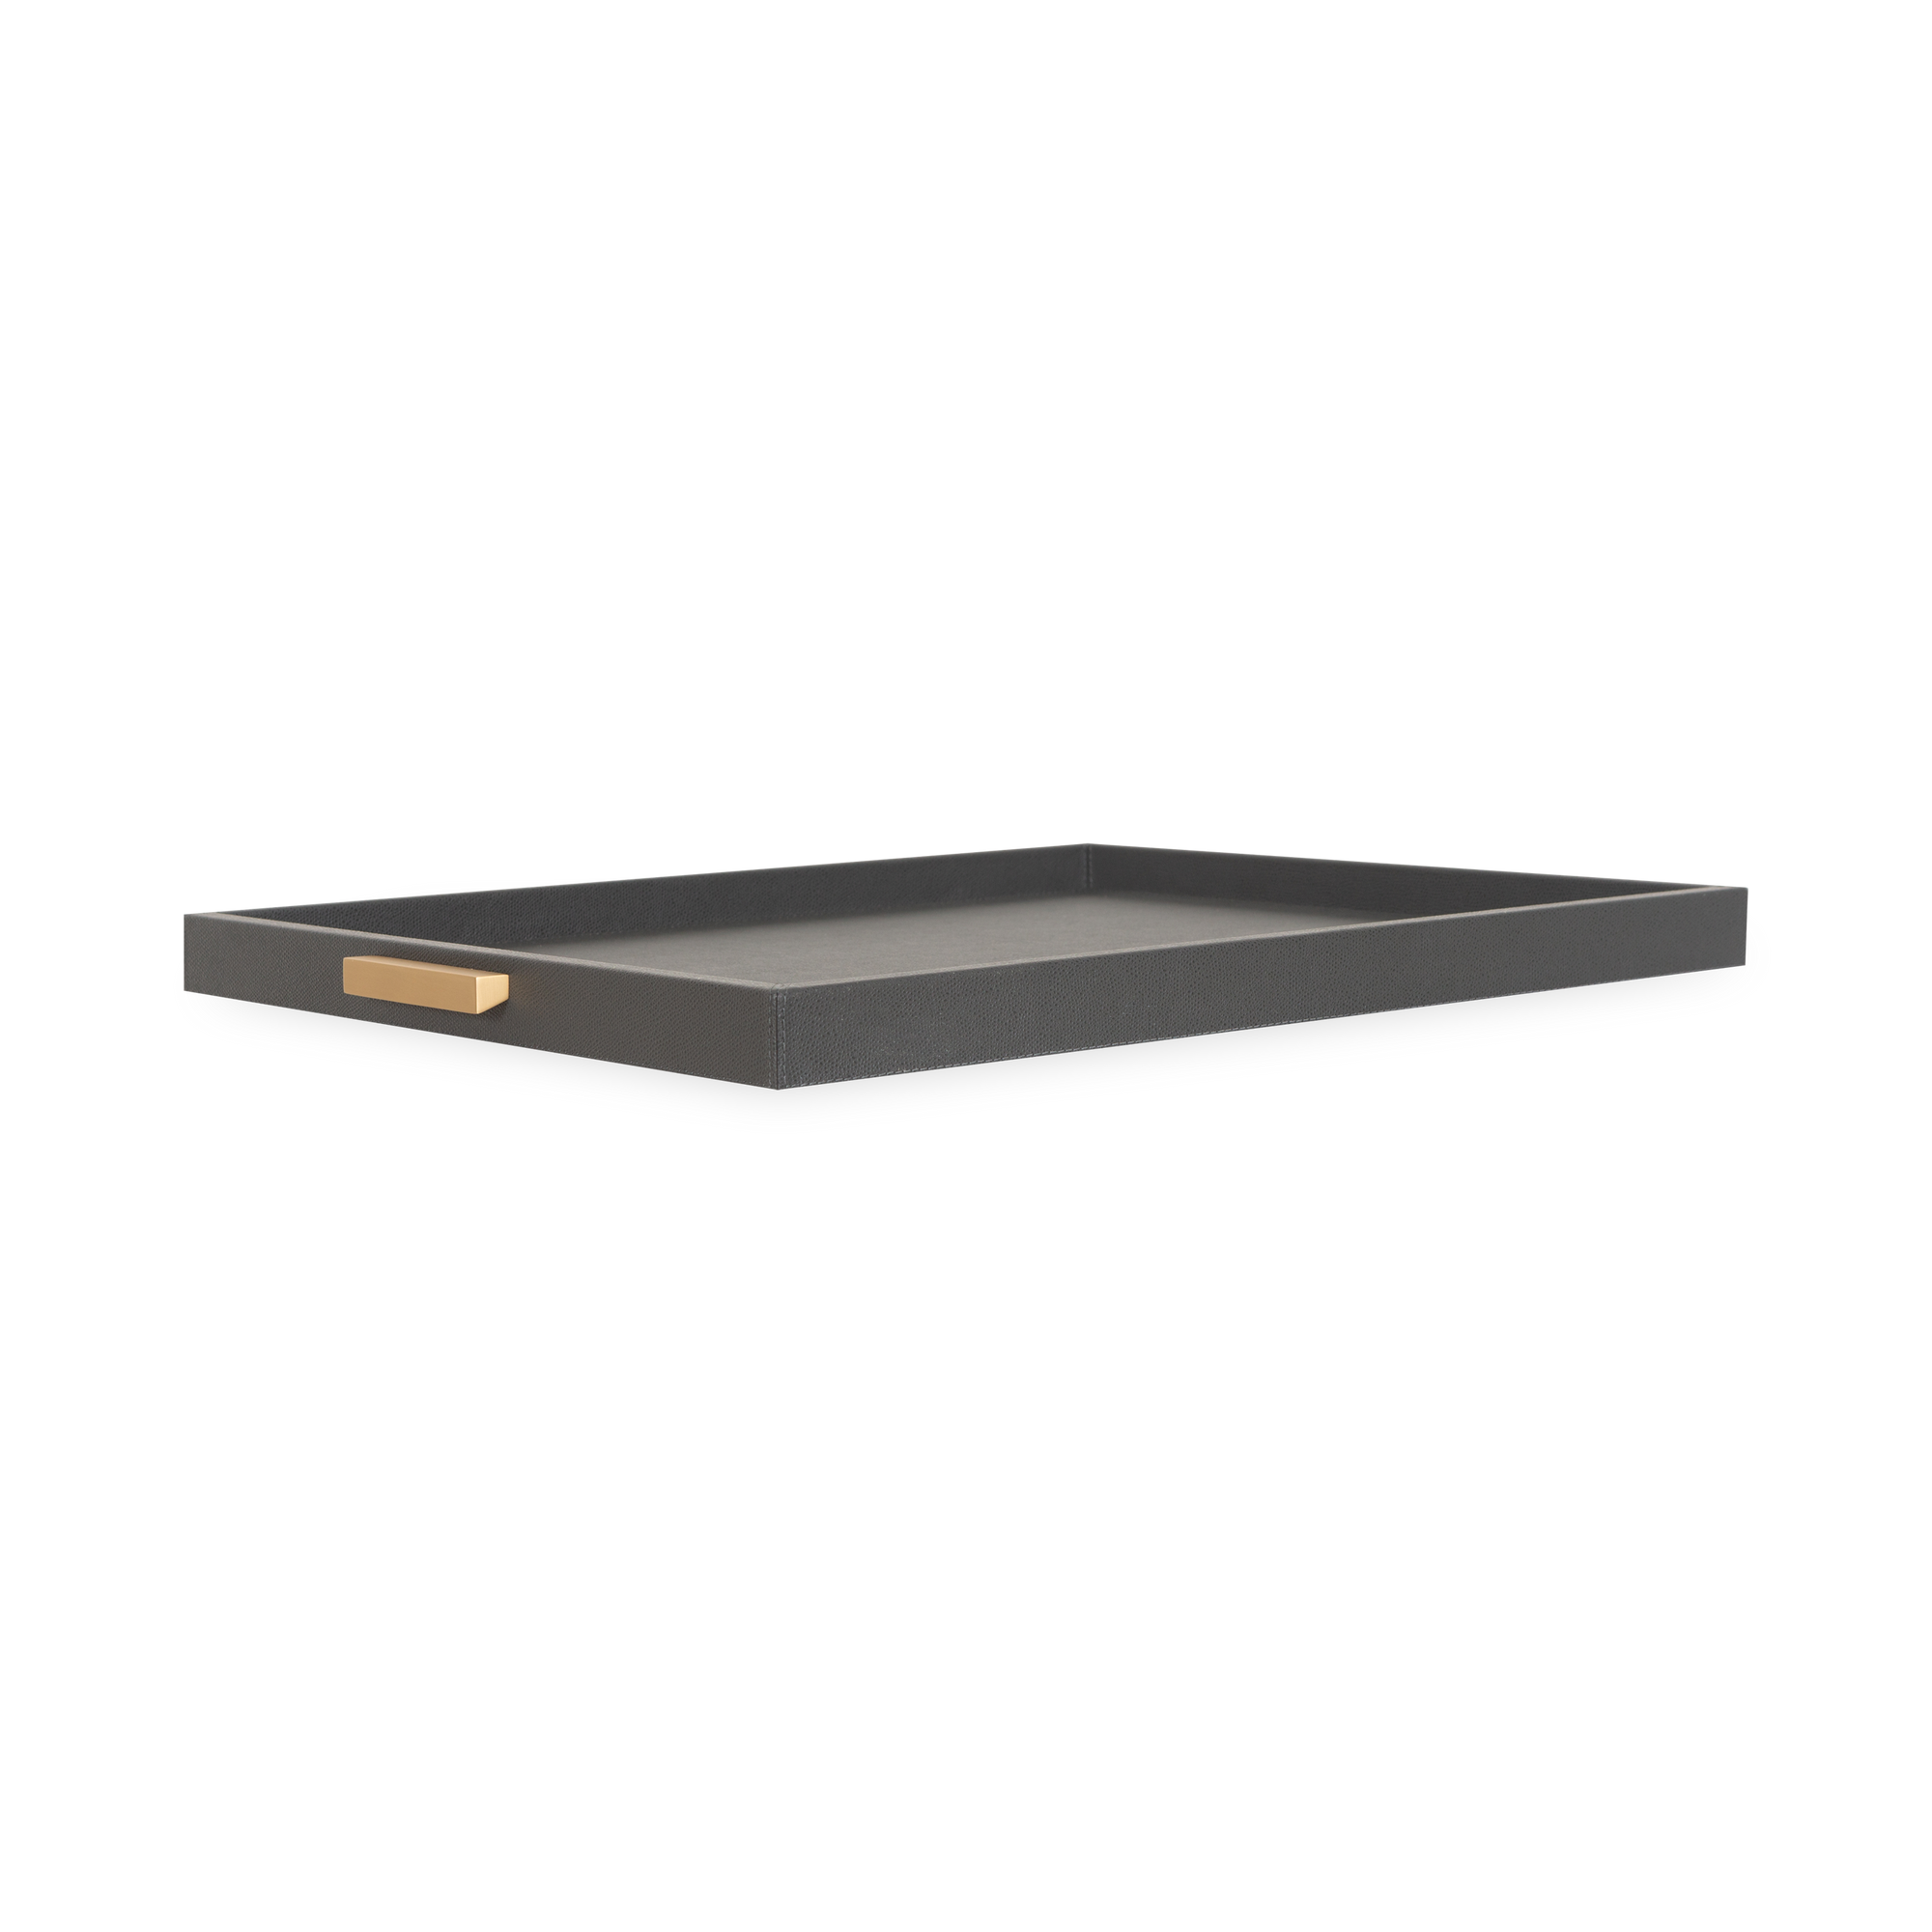 The Deco Tray features an elegant Italian leather that covers a wood structure with bronze-plated metal handles.